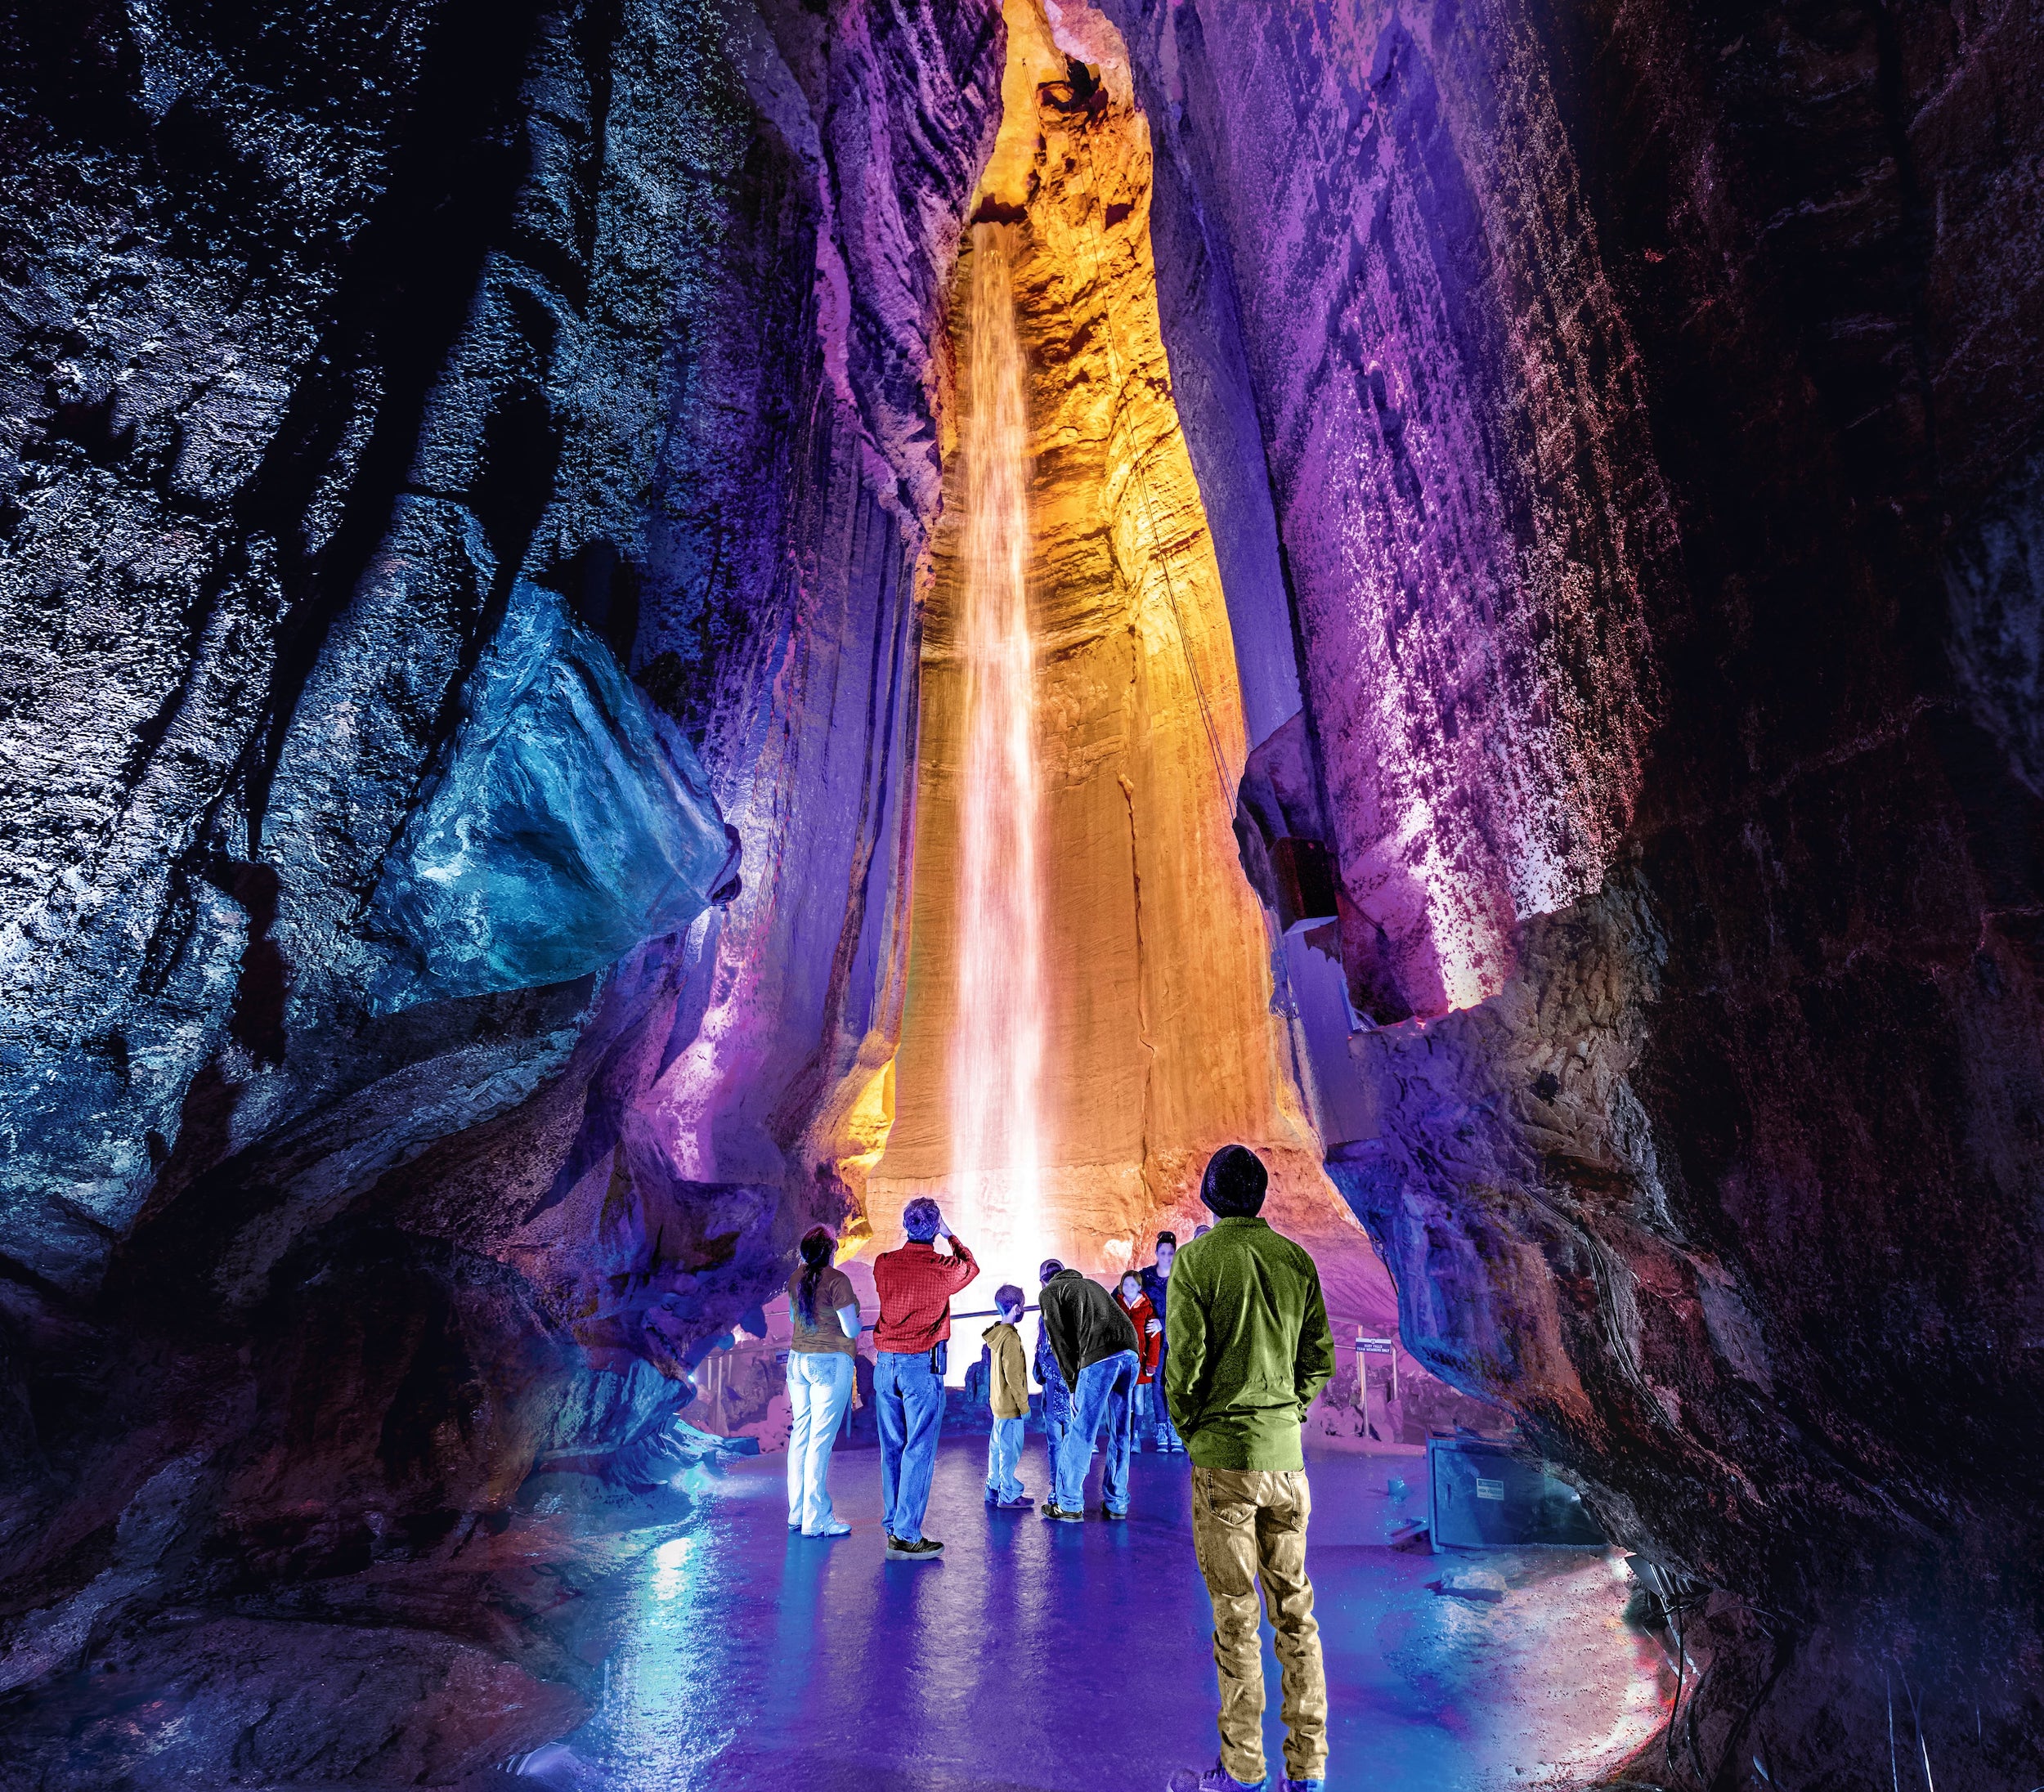 A group of people look at Ruby Falls